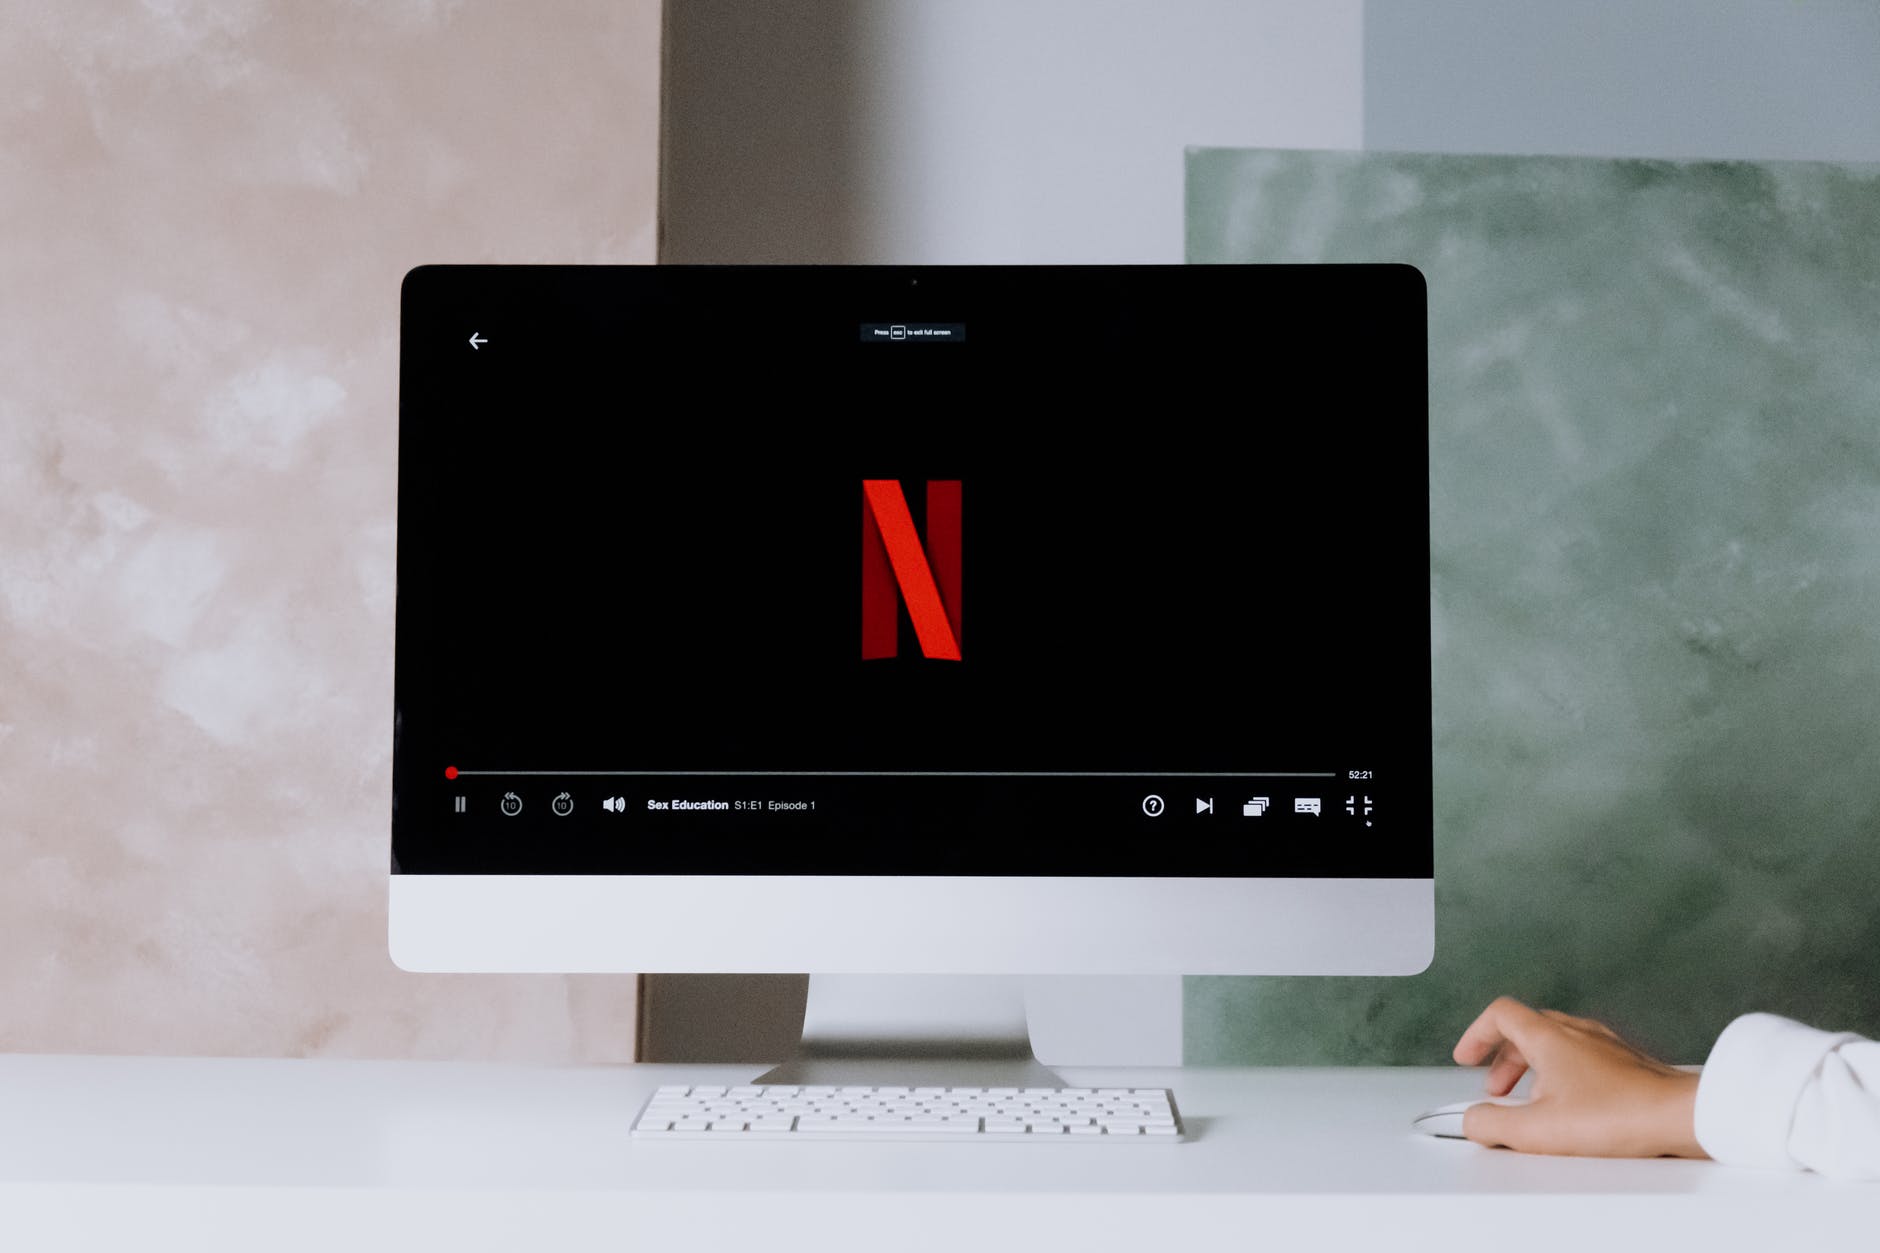 netflix on an imac | Netflix Wins Rights for Post-Theatrical Release of Spider-Verse 2 and More Sony Films Through New Deal